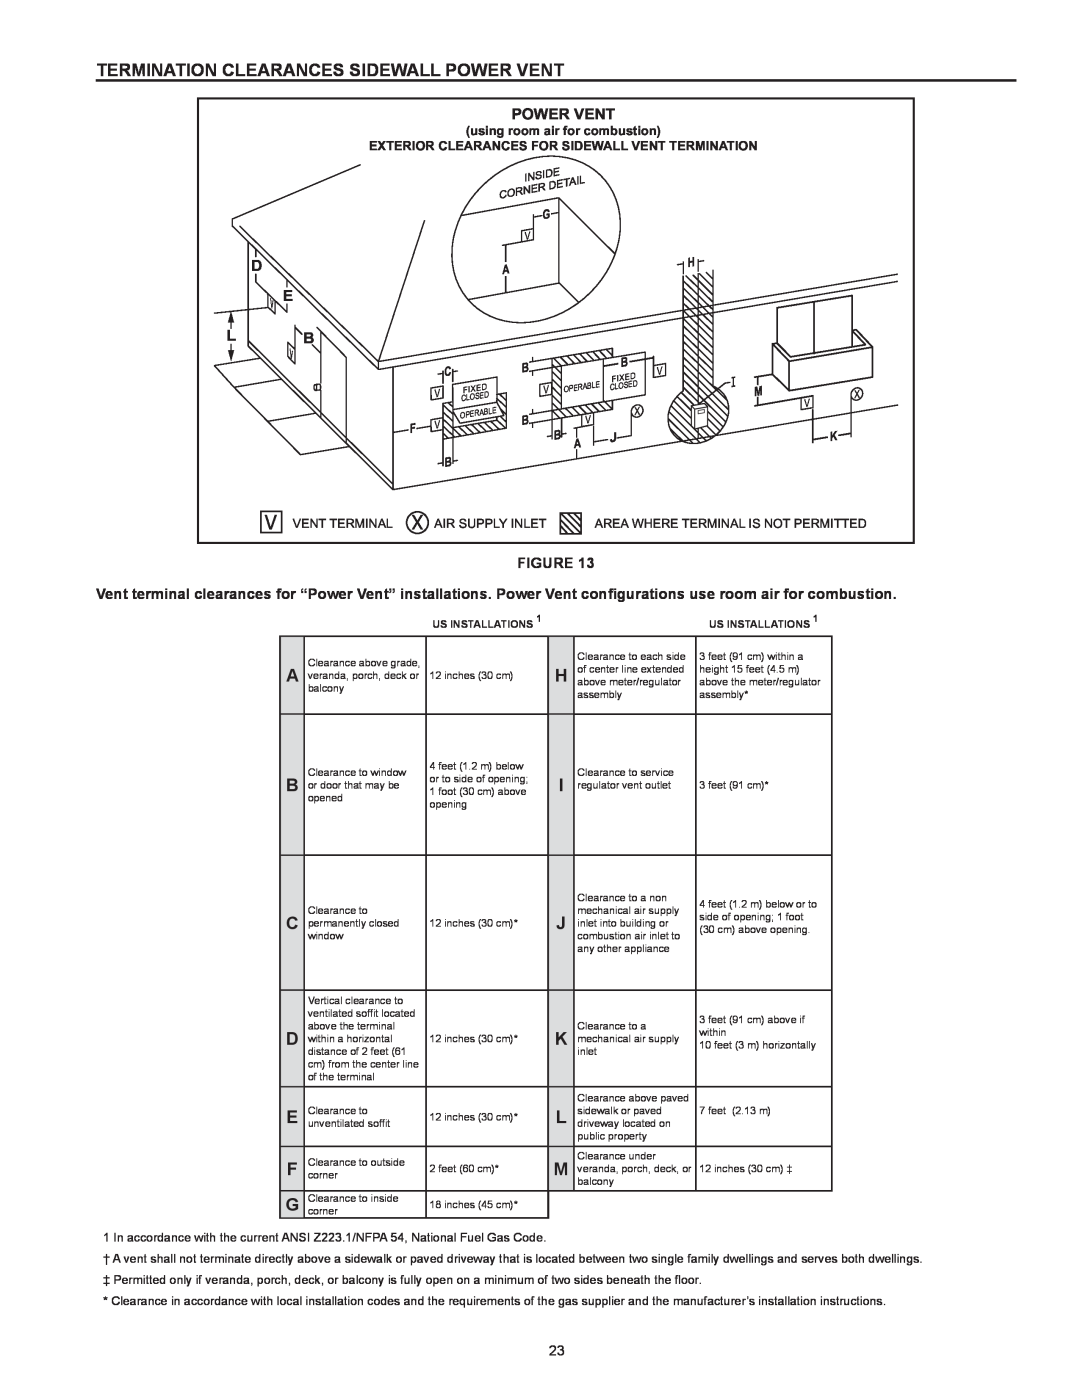 American Water Heater VG6250T100 instruction manual Termination Clearances Sidewall Power Vent 